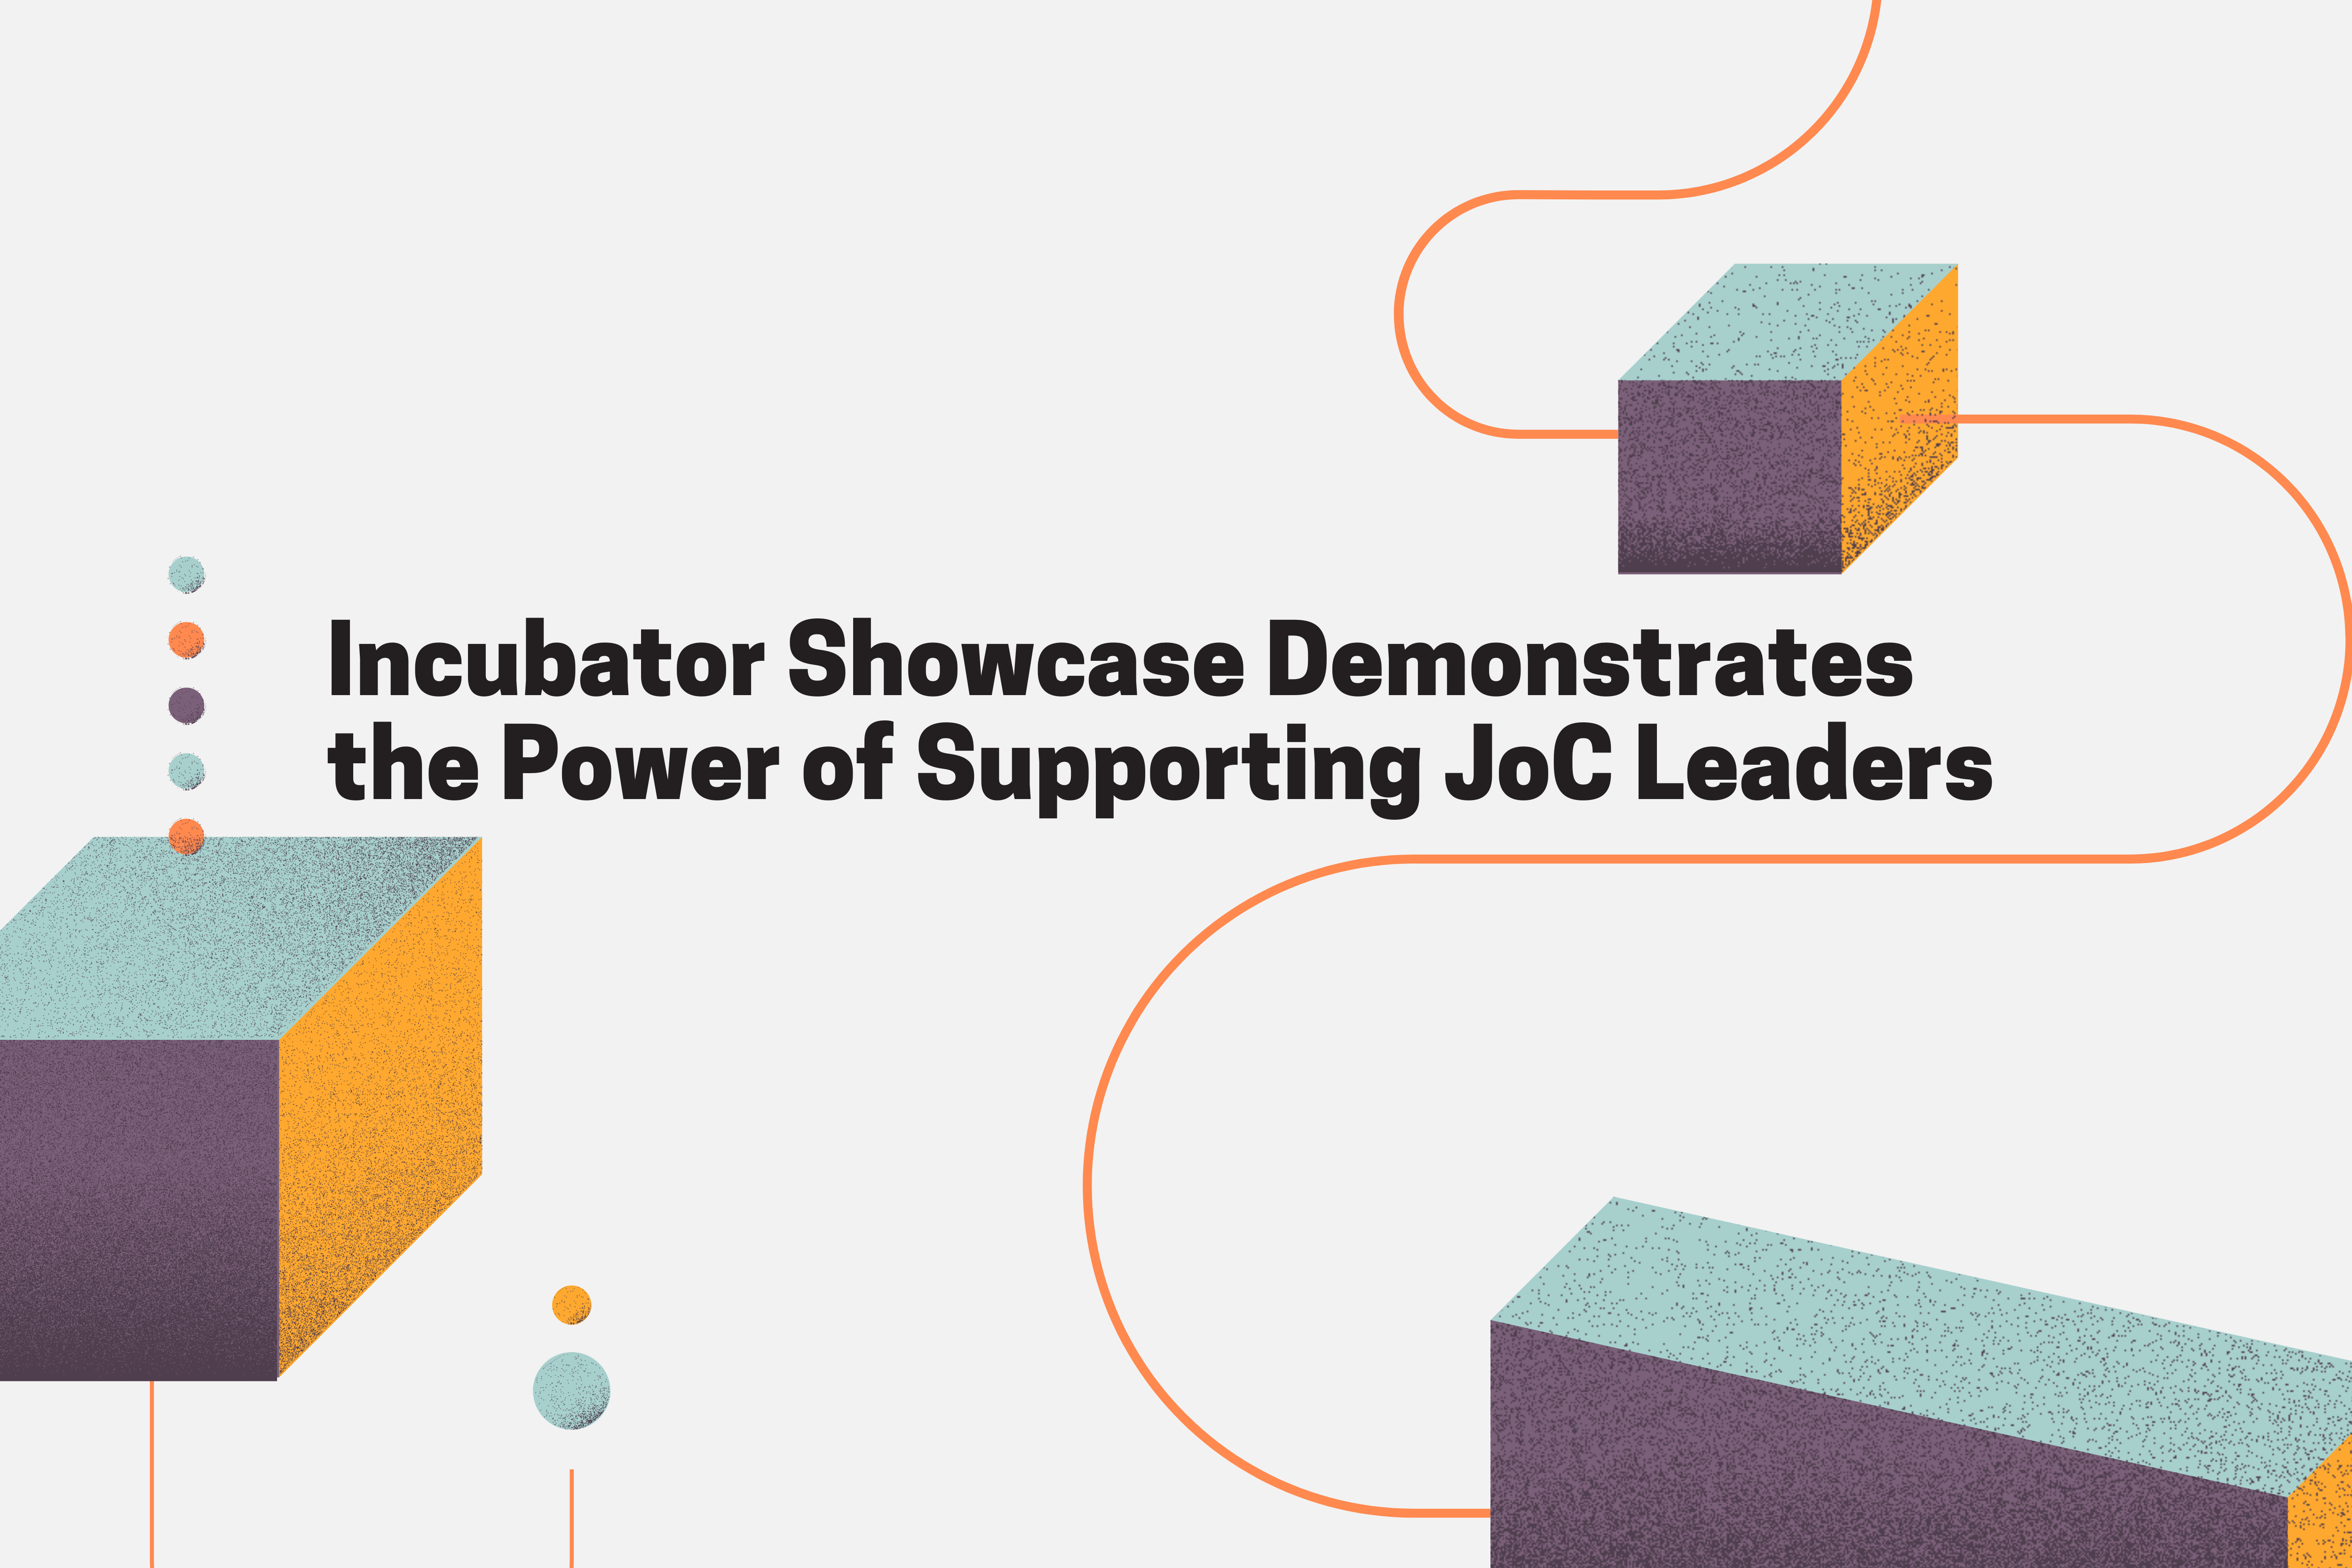 Incubator Showcase Demonstrates the Power of Supporting JoC Leaders; off-white background with multicolored cubes, dots, and connecting lines